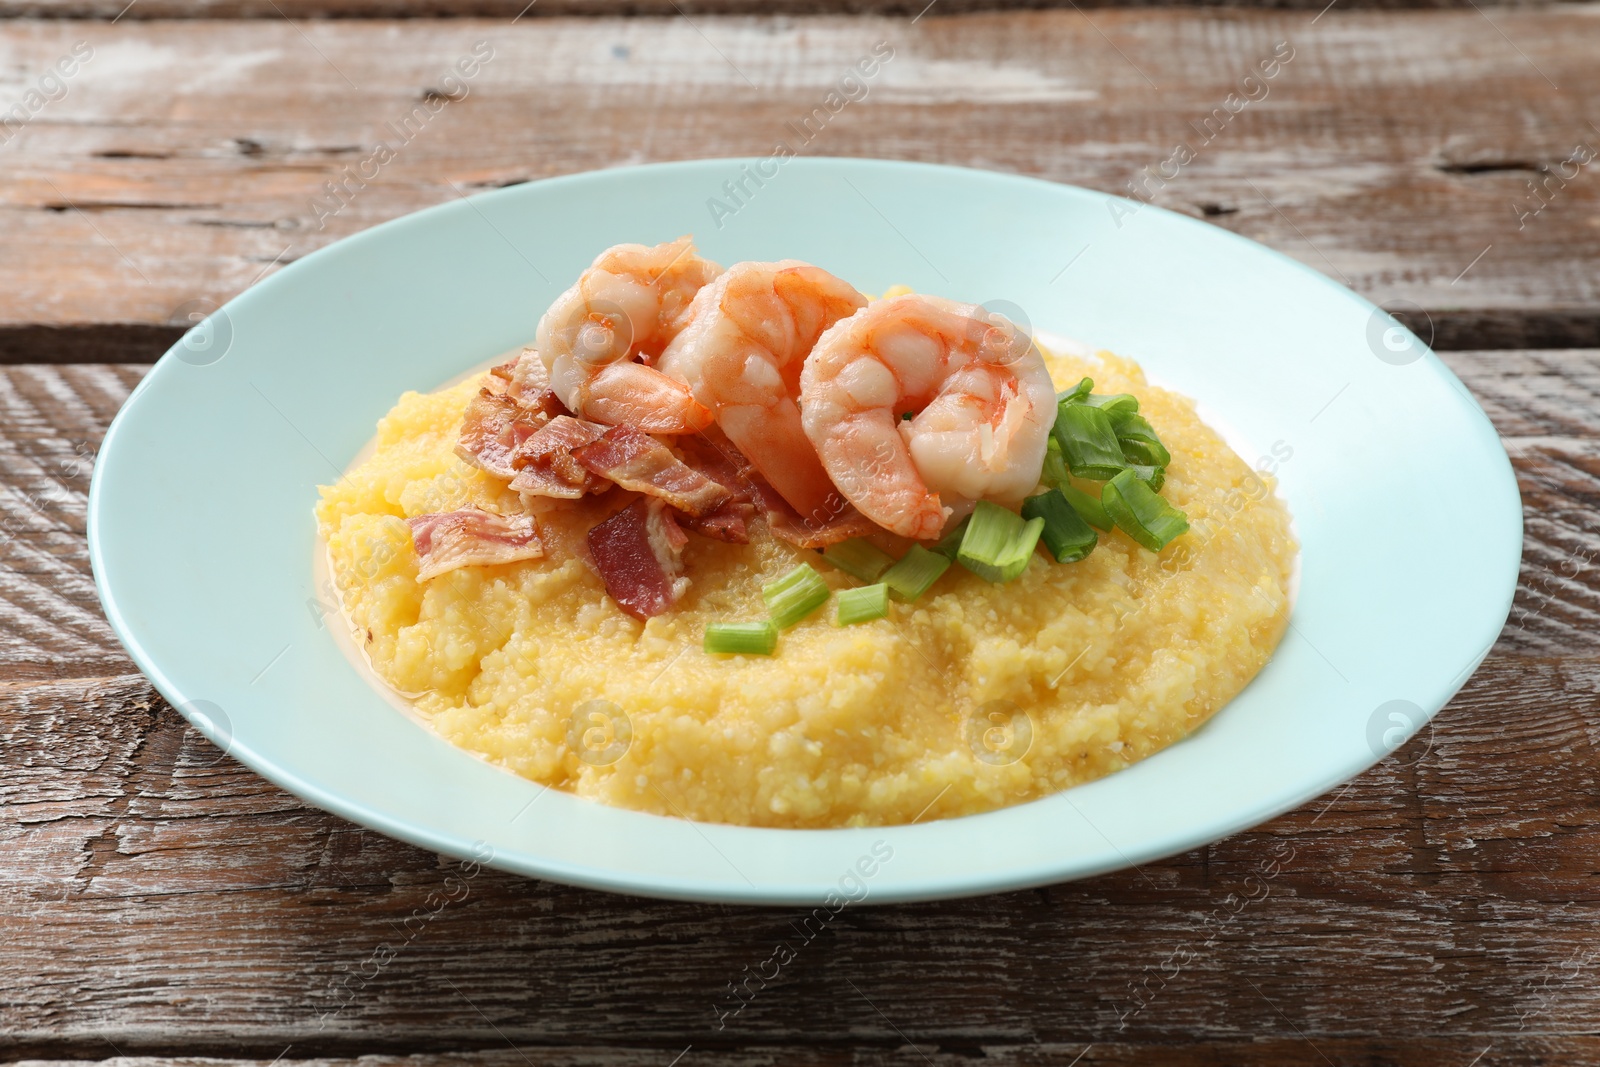 Photo of Plate with fresh tasty shrimps, bacon, grits and green onion on wooden table